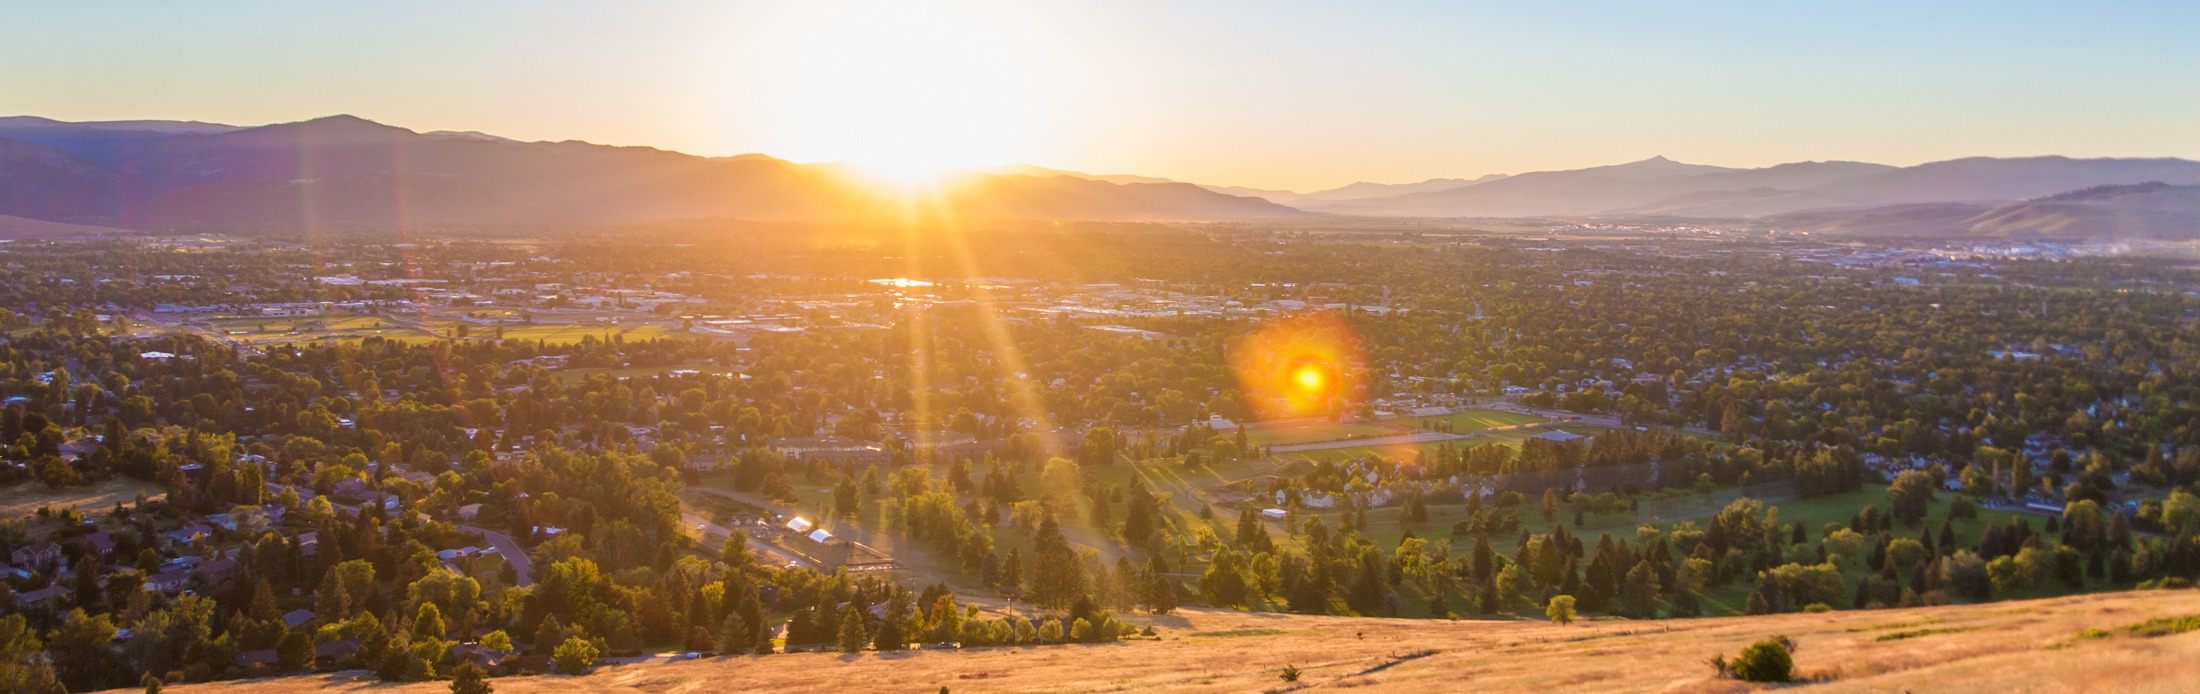 12 Reasons to be Excited about Summer in Missoula